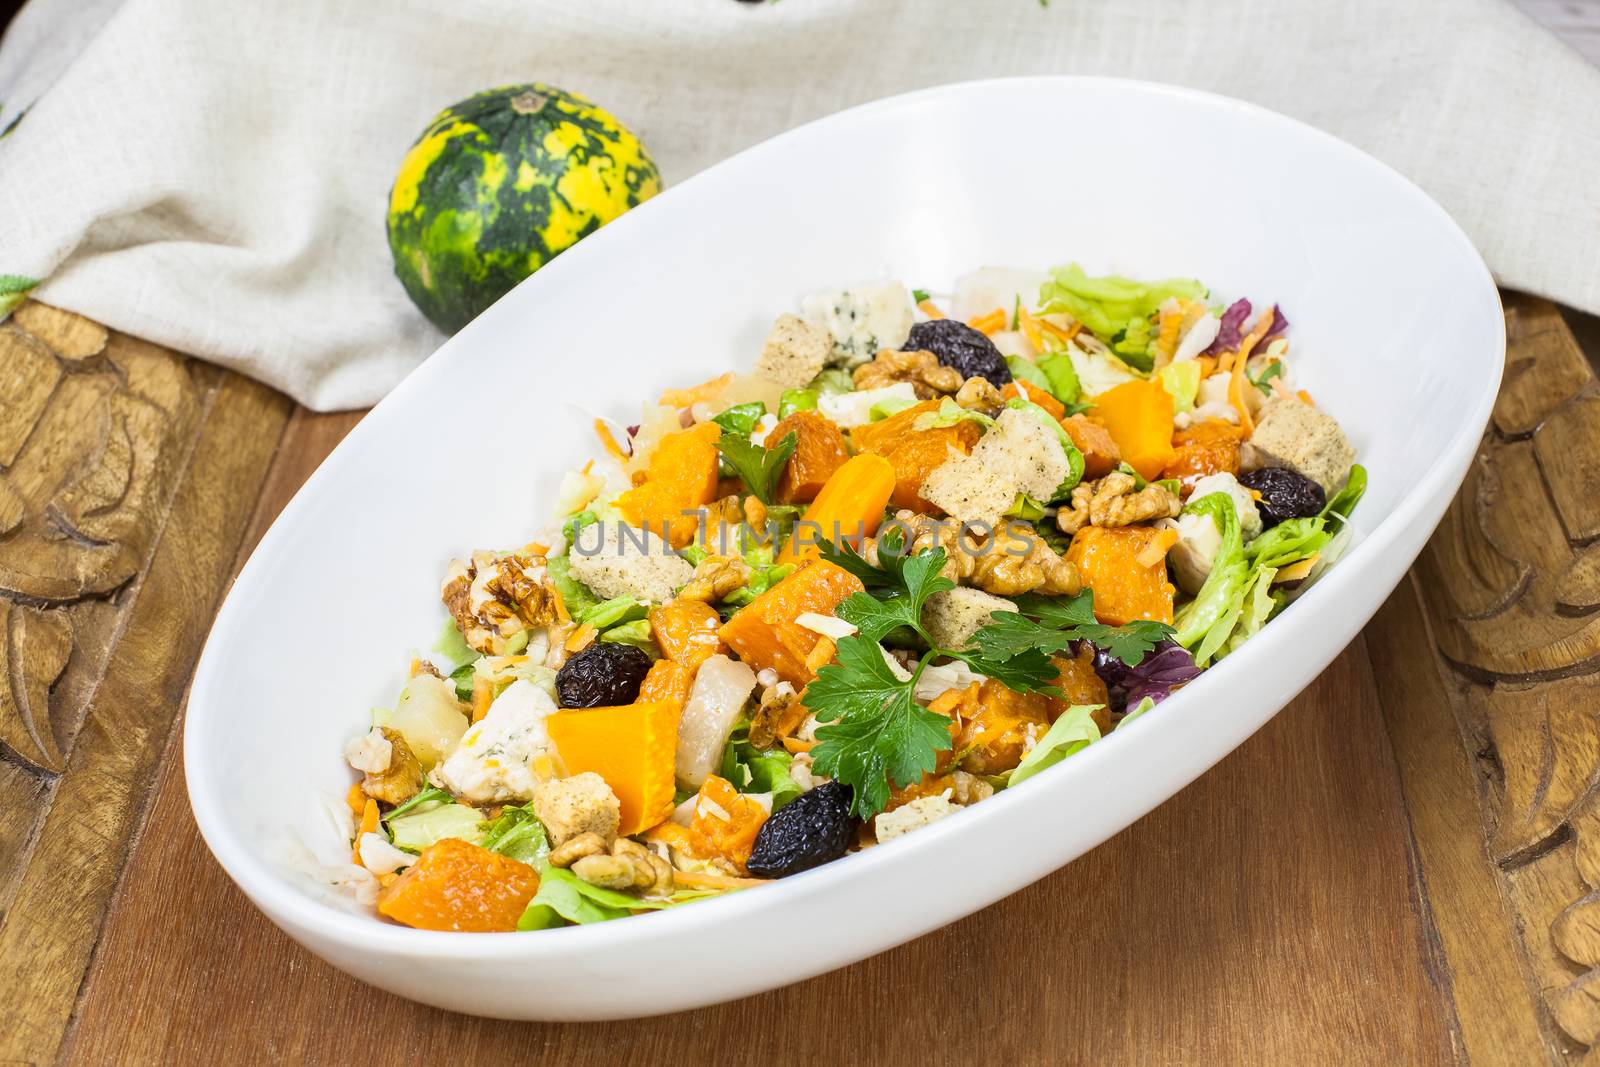 Pumpkin, Walnuts and Goat Cheese Salad. Viewed from above